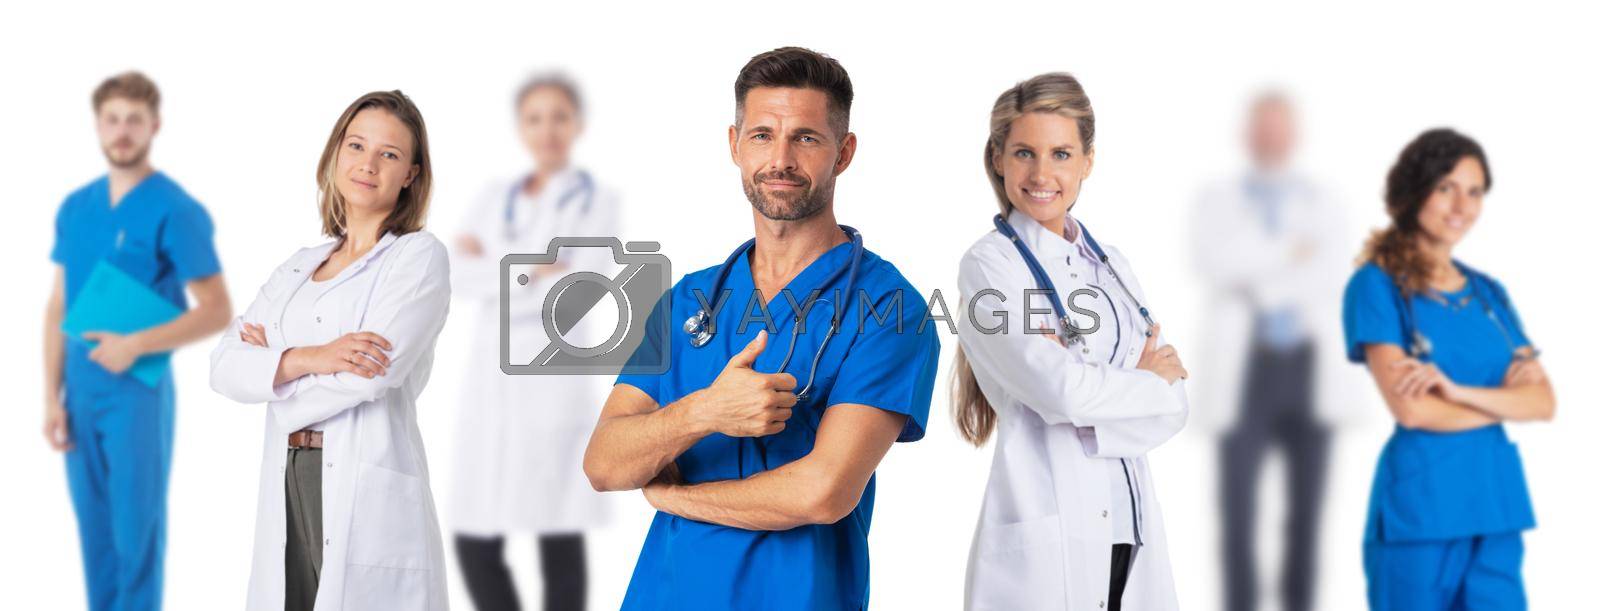 Royalty free image of Group of medical doctors by ALotOfPeople